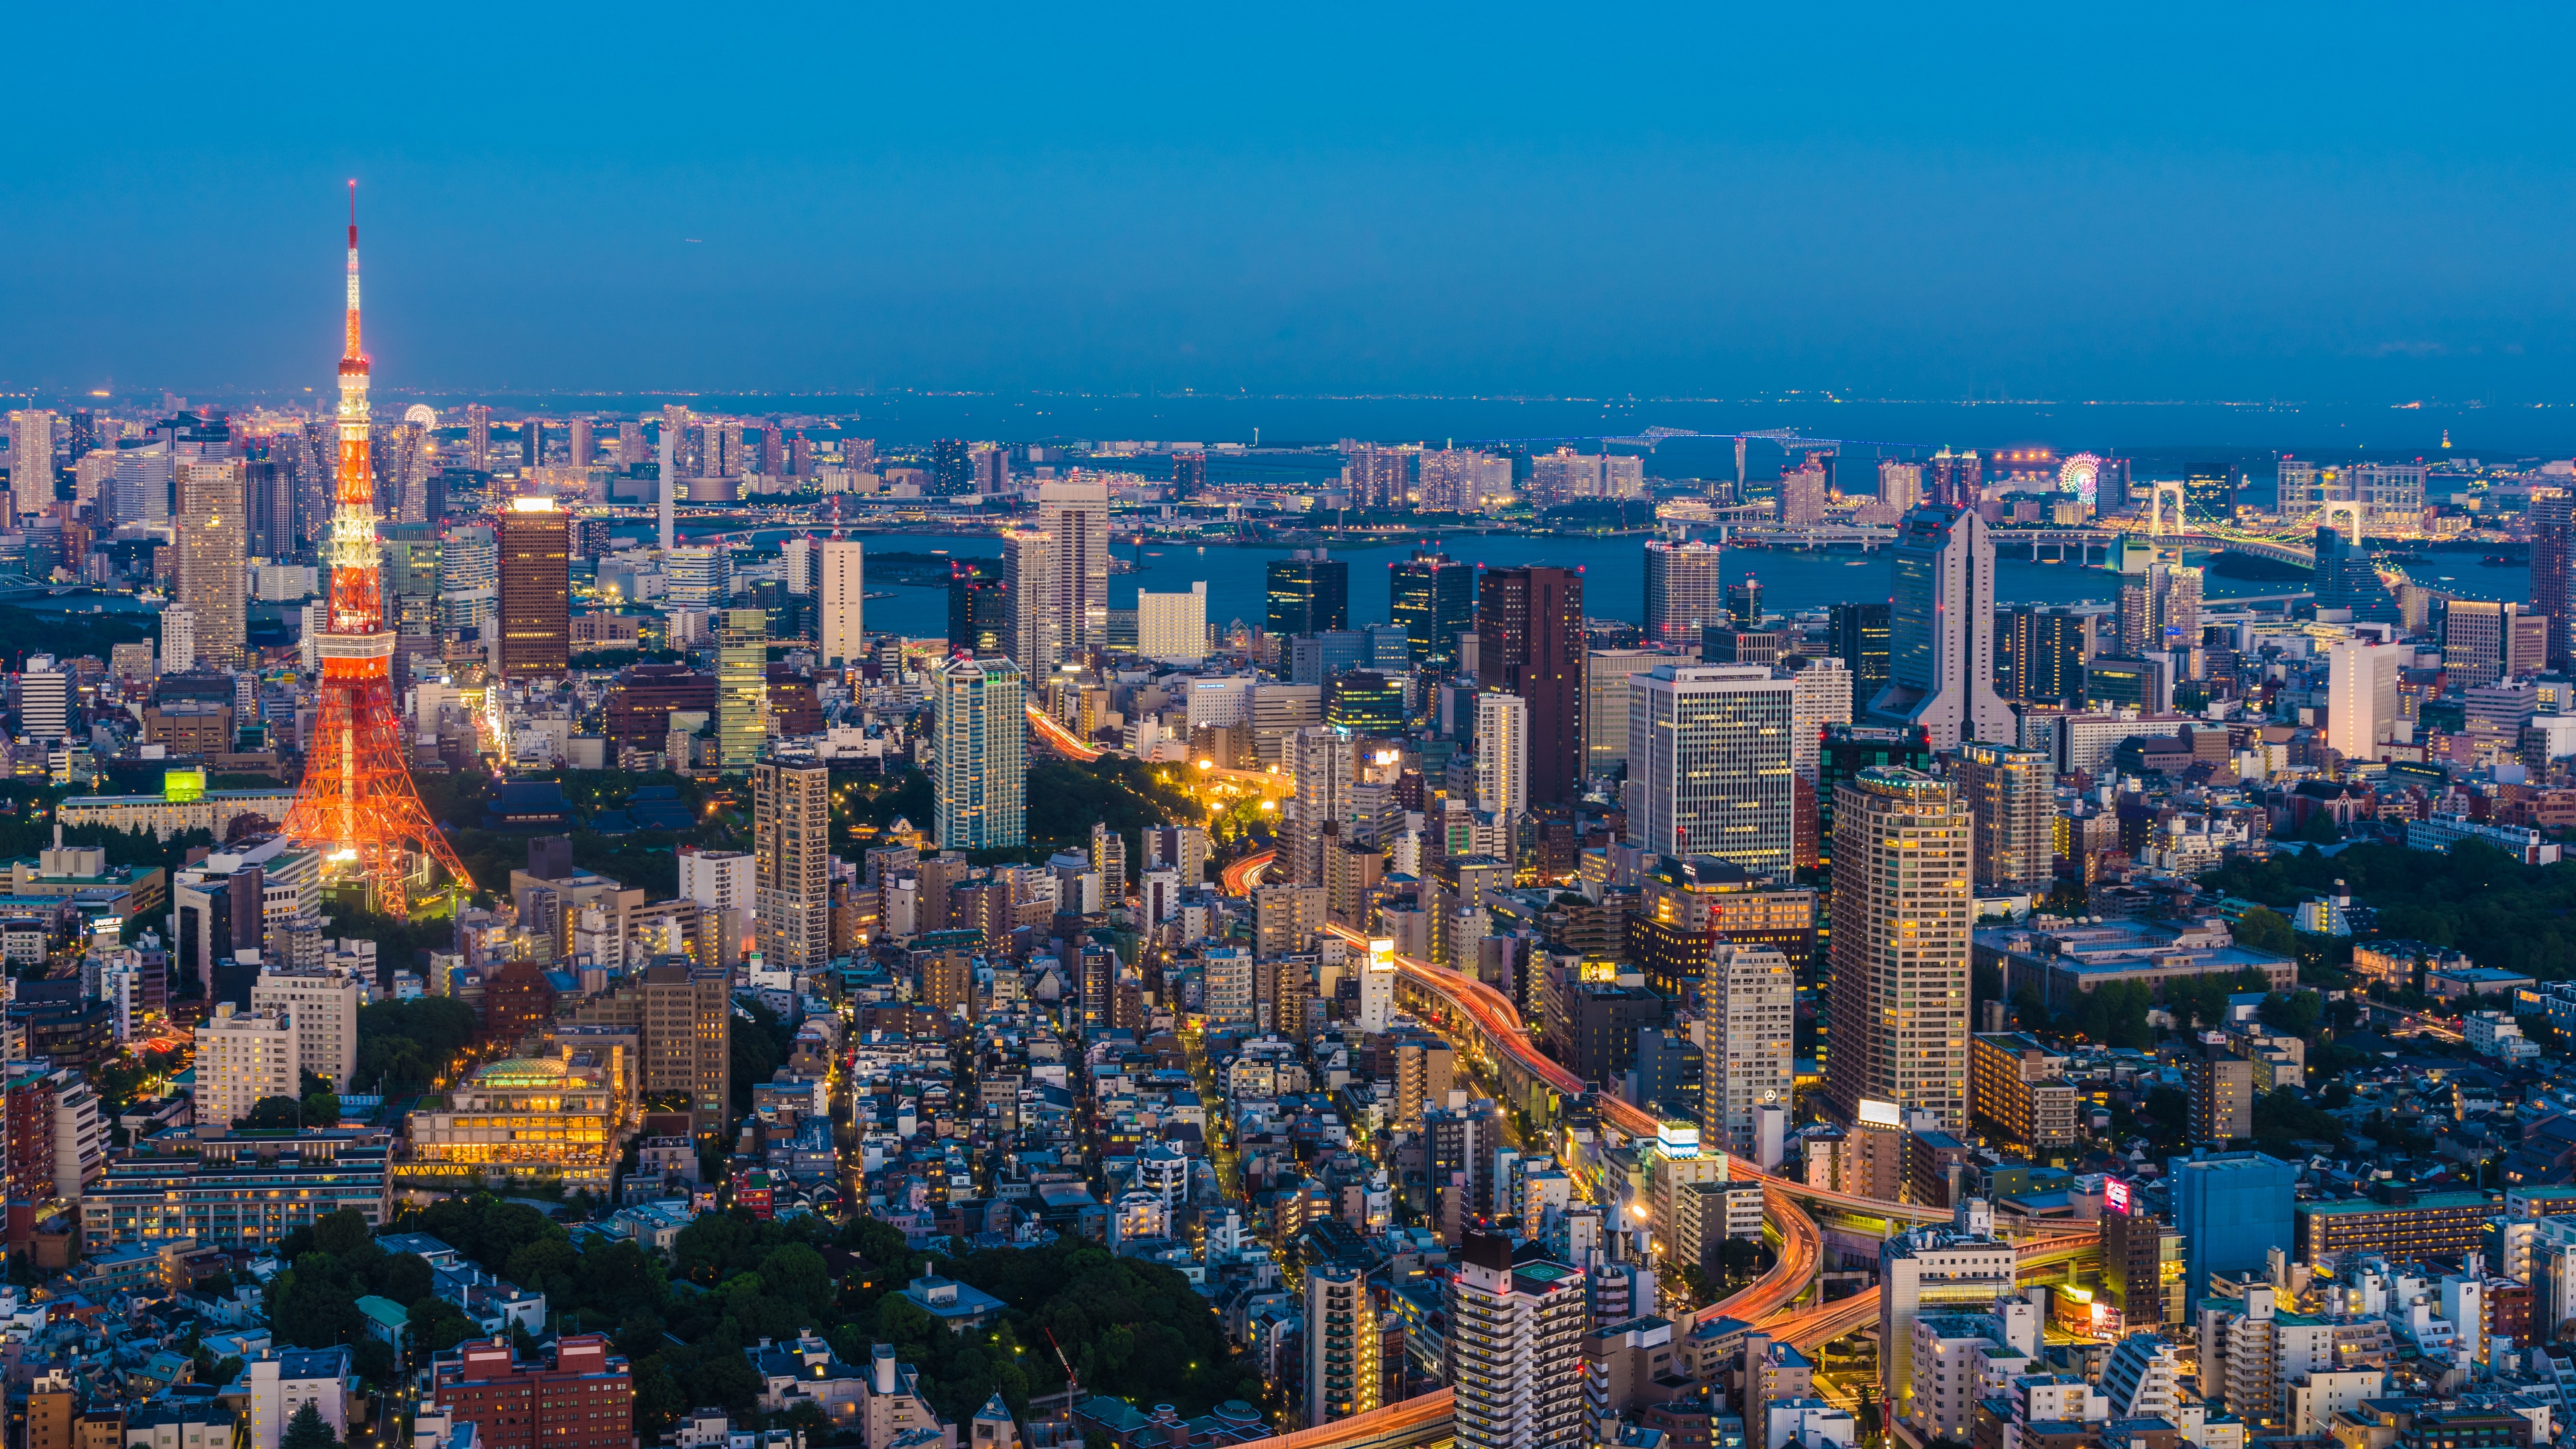 Wallpaper Skyscrapers, City, View From Above, Buildings - Tokyo - HD Wallpaper 